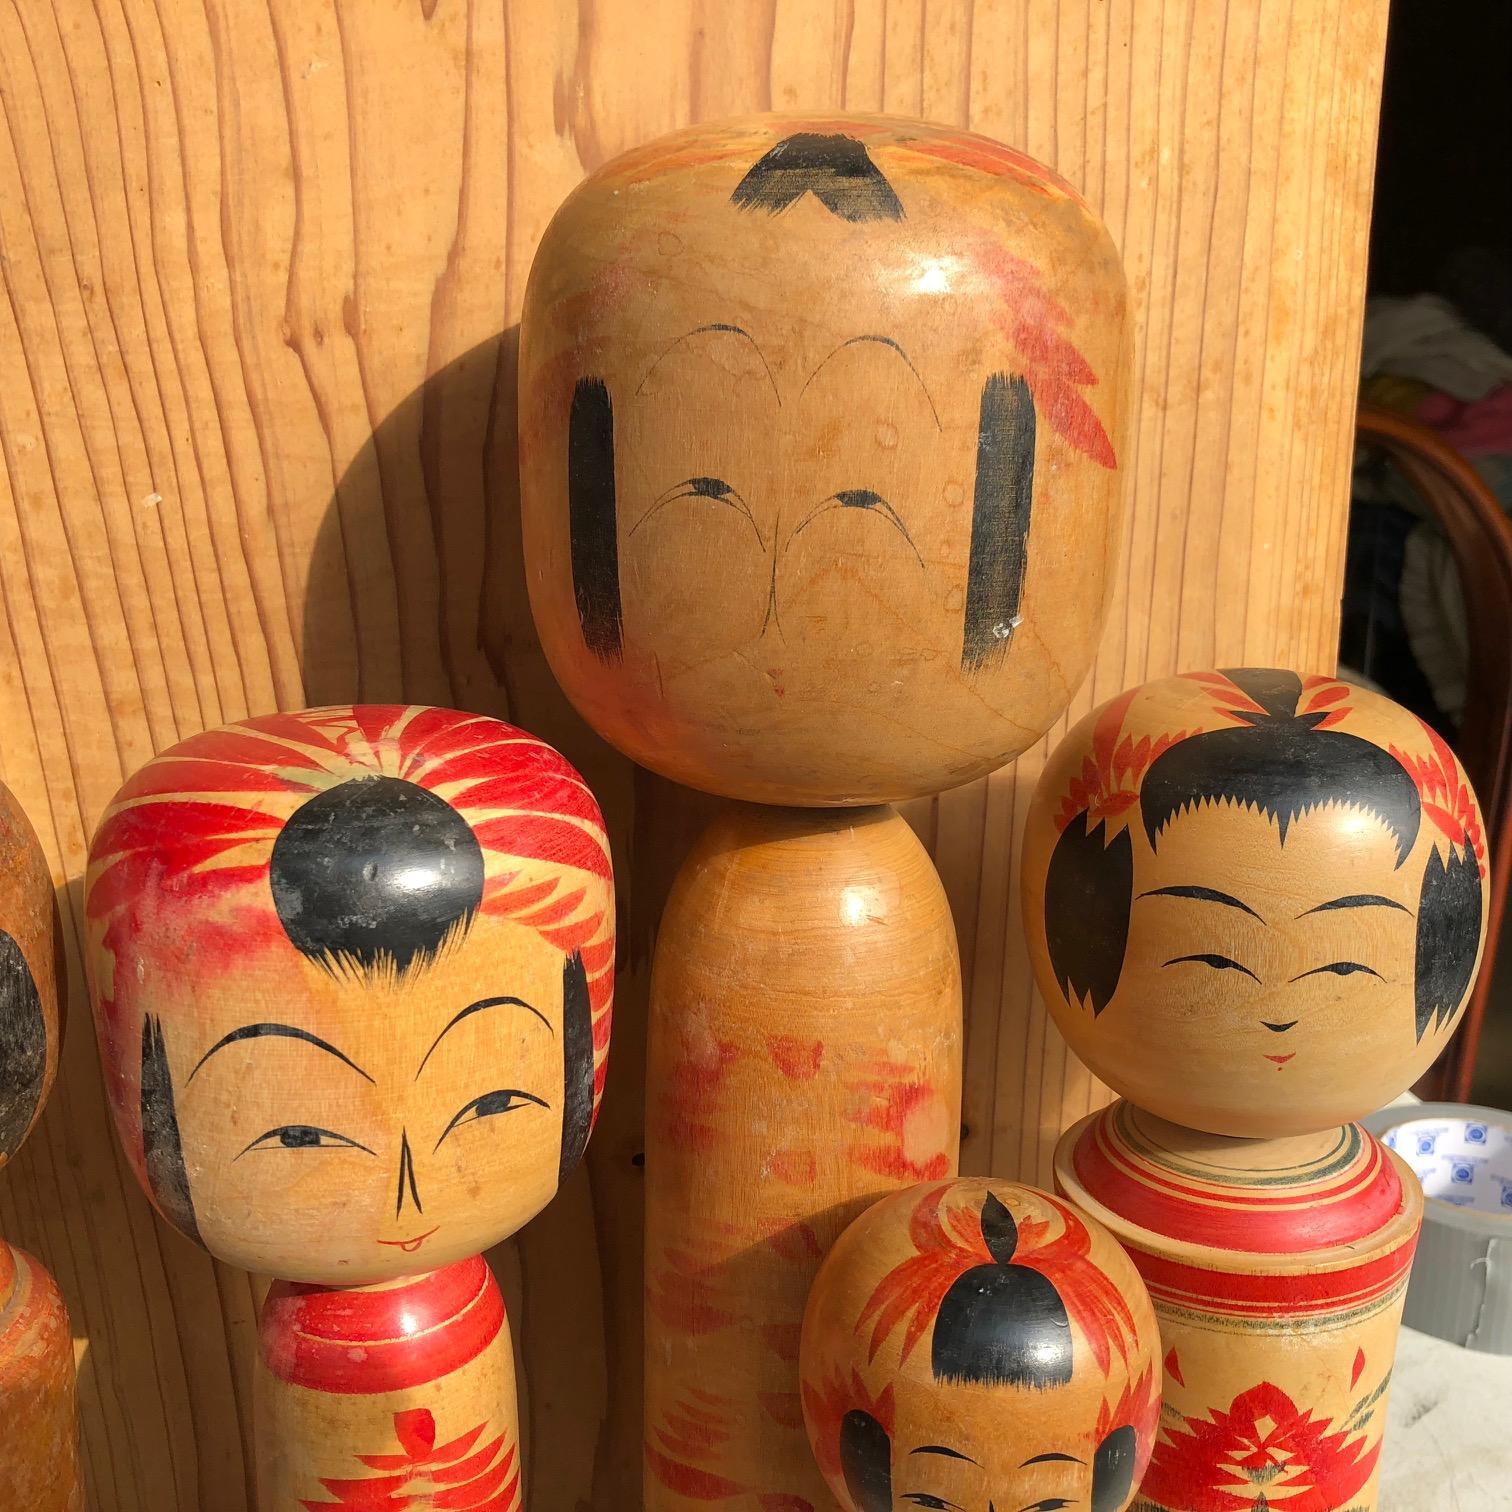 Showa Family Five Old Japanese Famous Kokeshi Dolls, All Hand-Painted and Signed